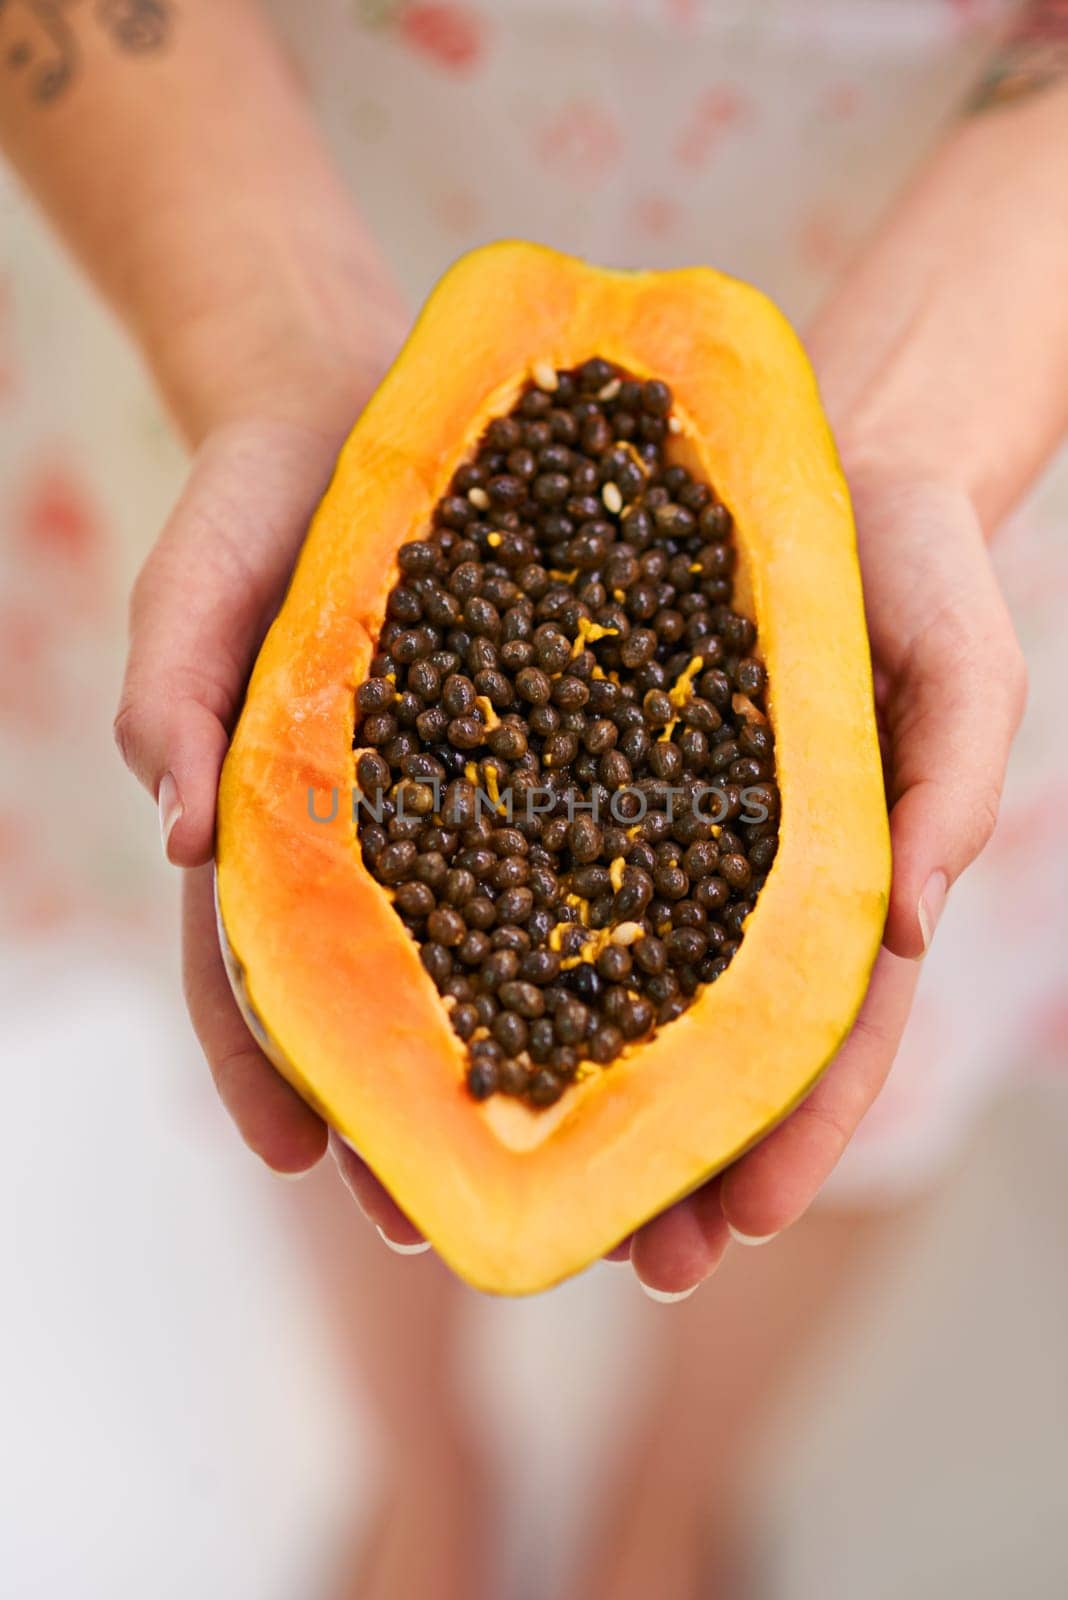 Fruit, papaya and hands in half with seeds for nutrition for healthy eating, nutrients and wellness. Above, pawpaw and diet with snack for weight loss with vitamin c for freshness with balance.